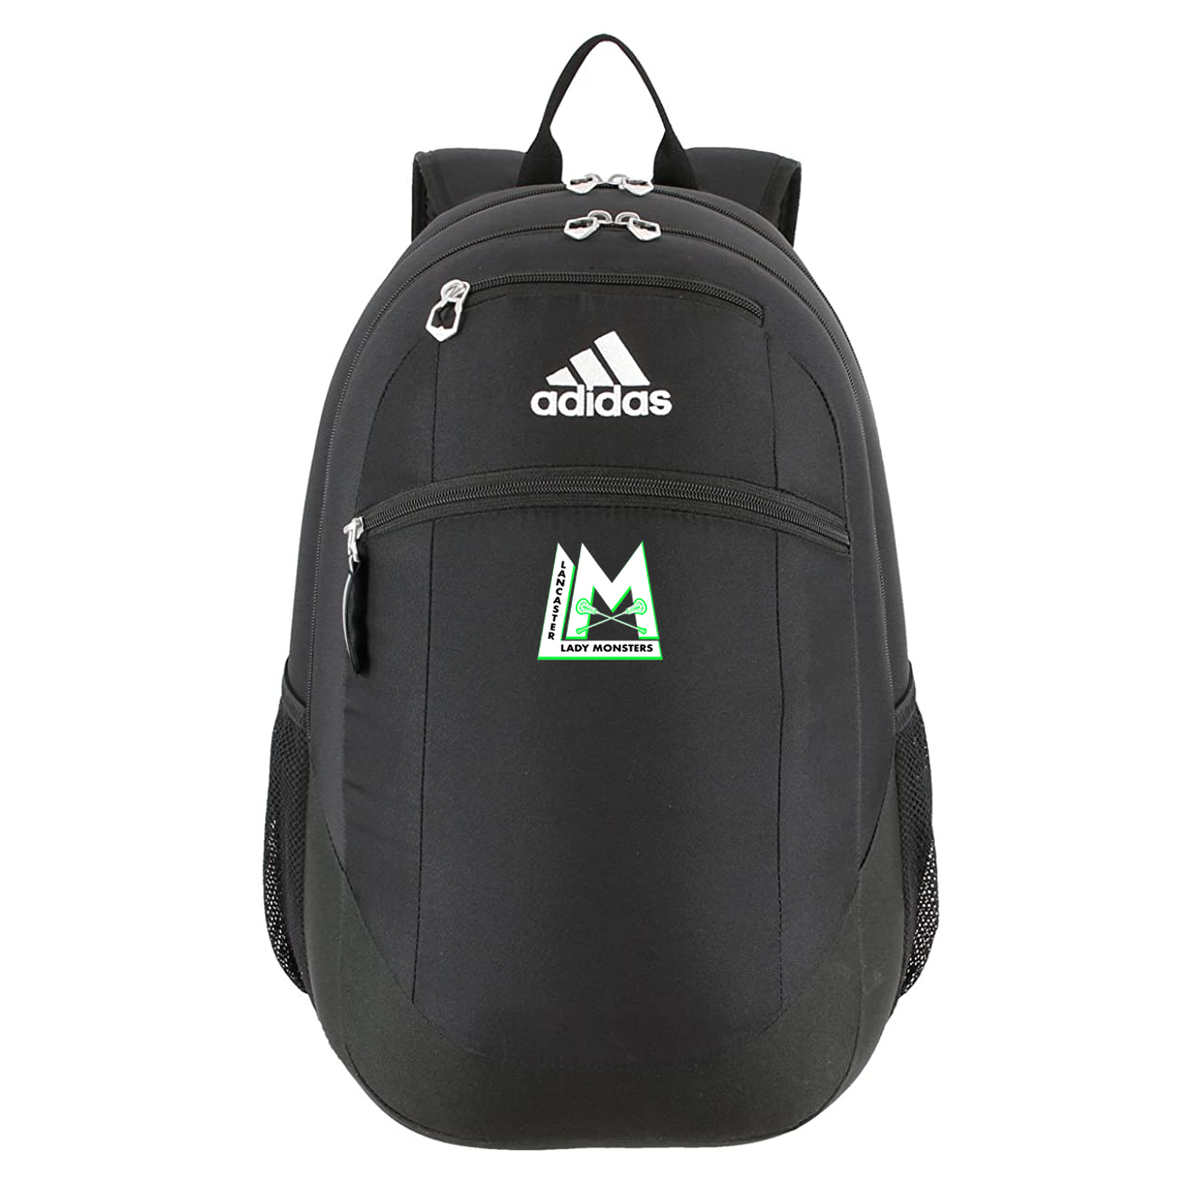 Lancaster Lady Monsters Adidas Team Backpack